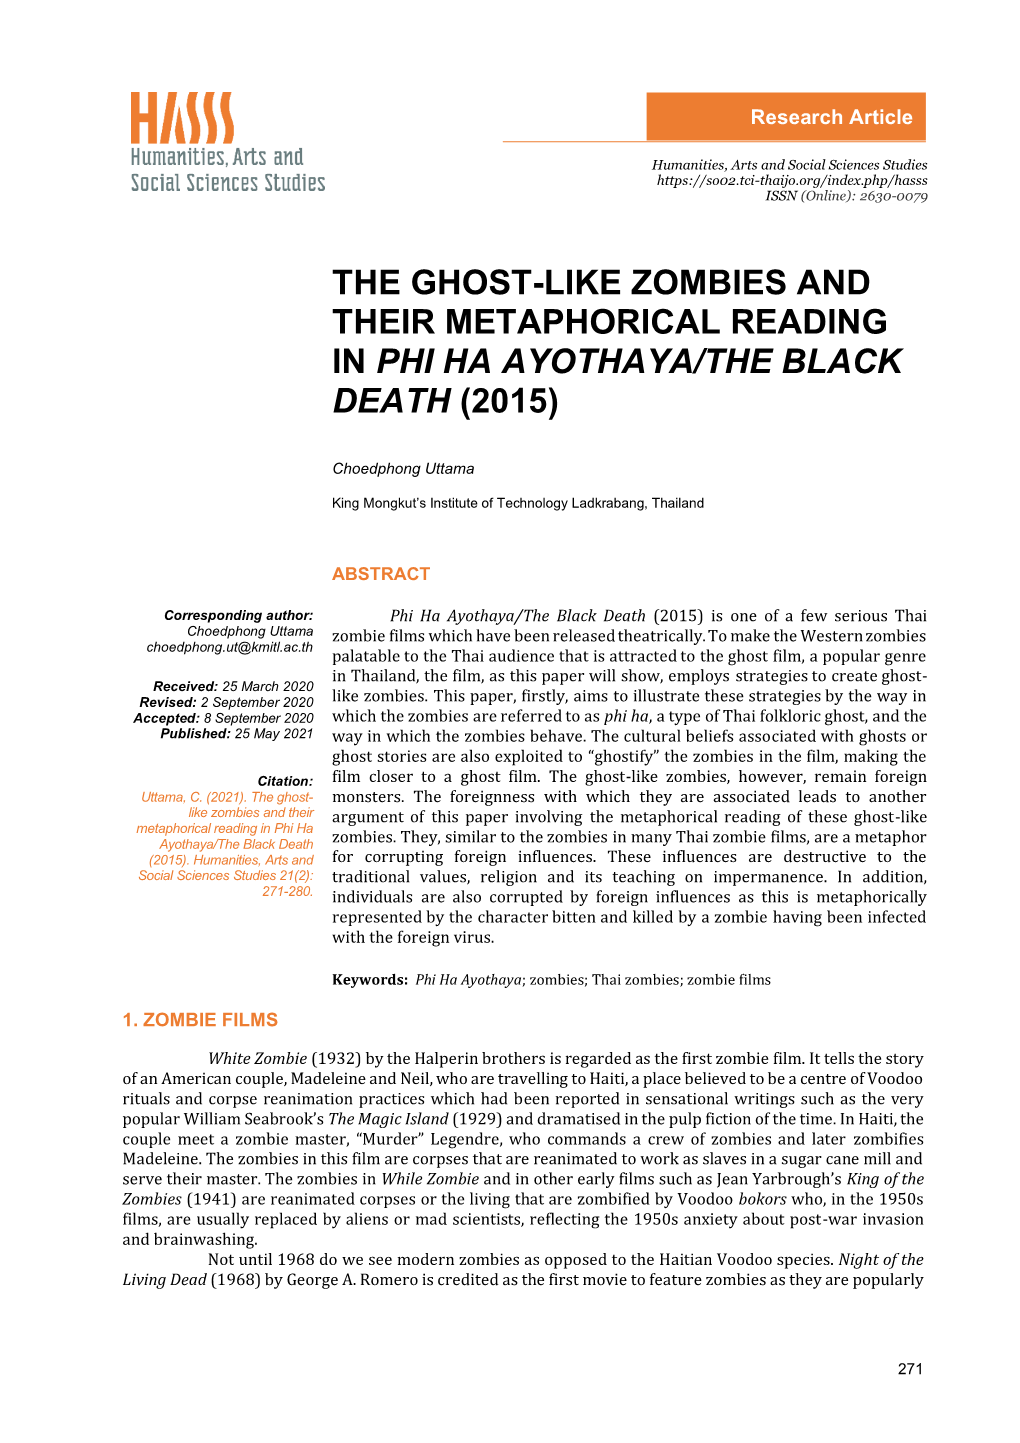 The Ghost-Like Zombies and Their Metaphorical Reading in Phi Ha Ayothaya/The Black Death (2015)